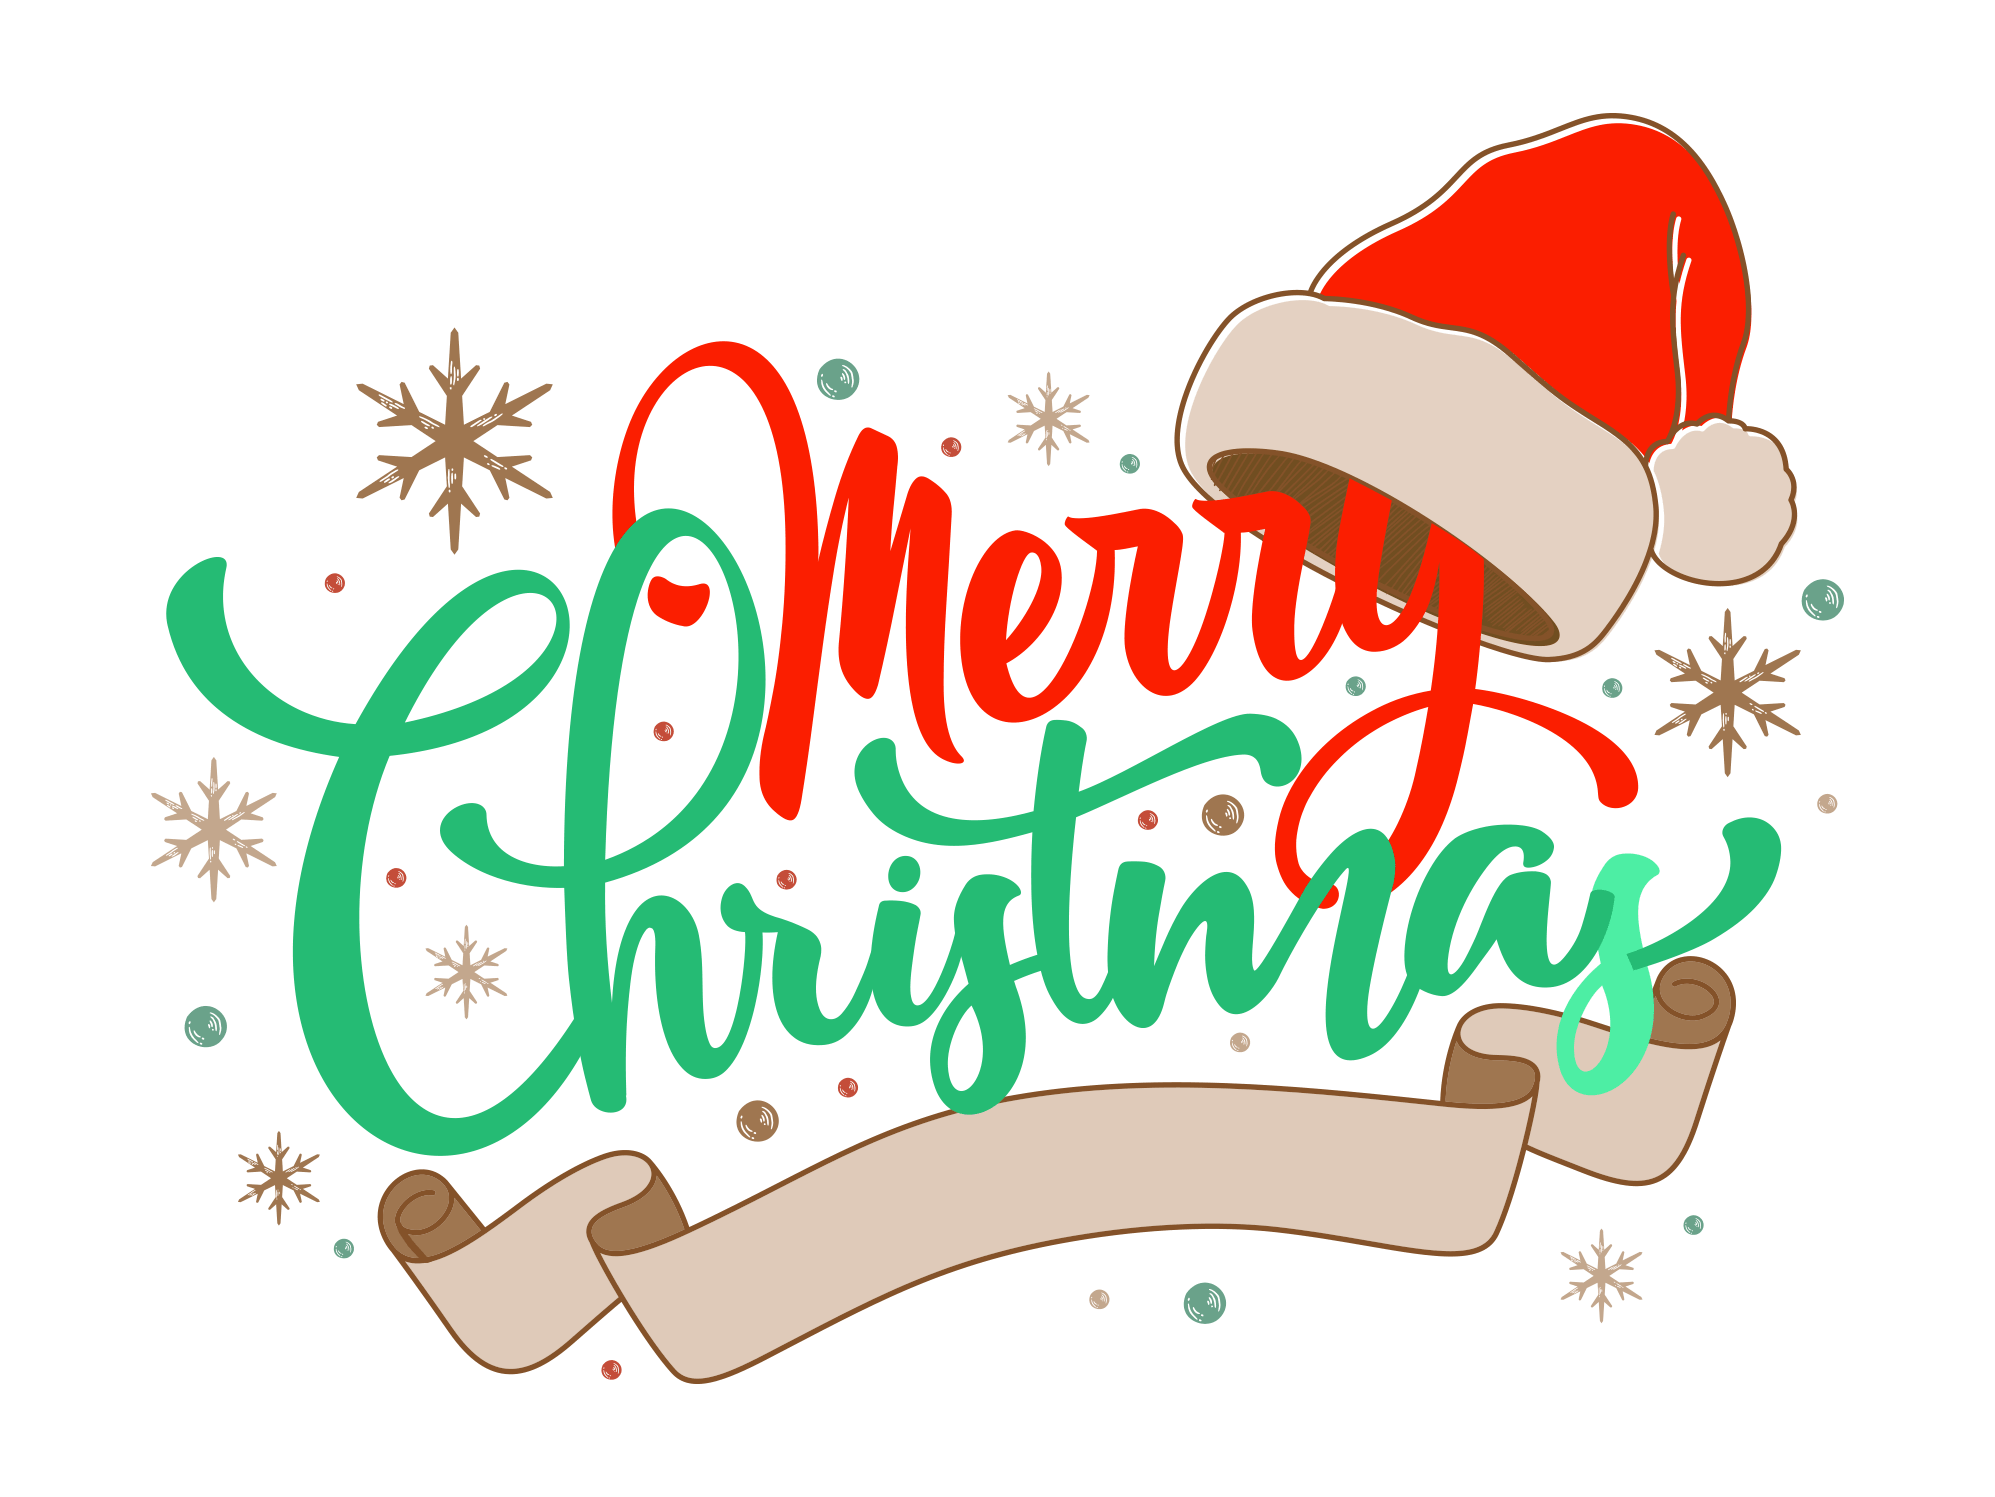 Merry Christmas Text PNG HQ Image Transparent